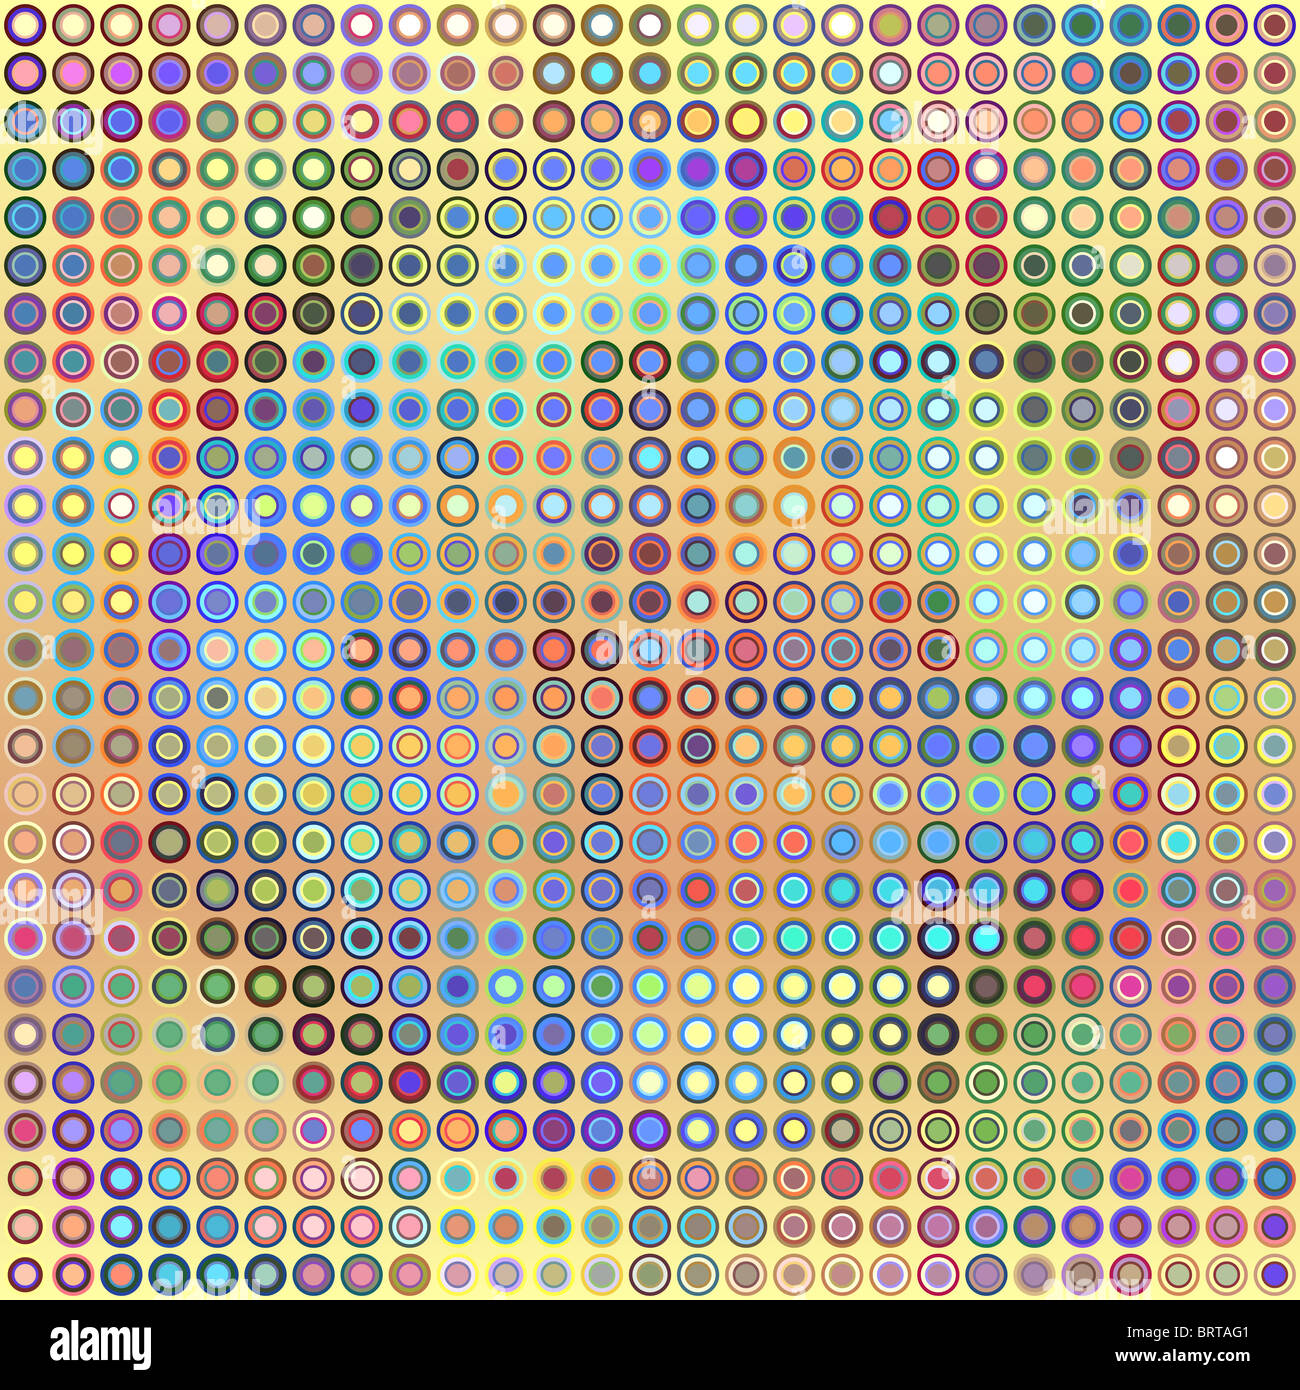 Abstract background illustration of multicolored dots Stock Photo